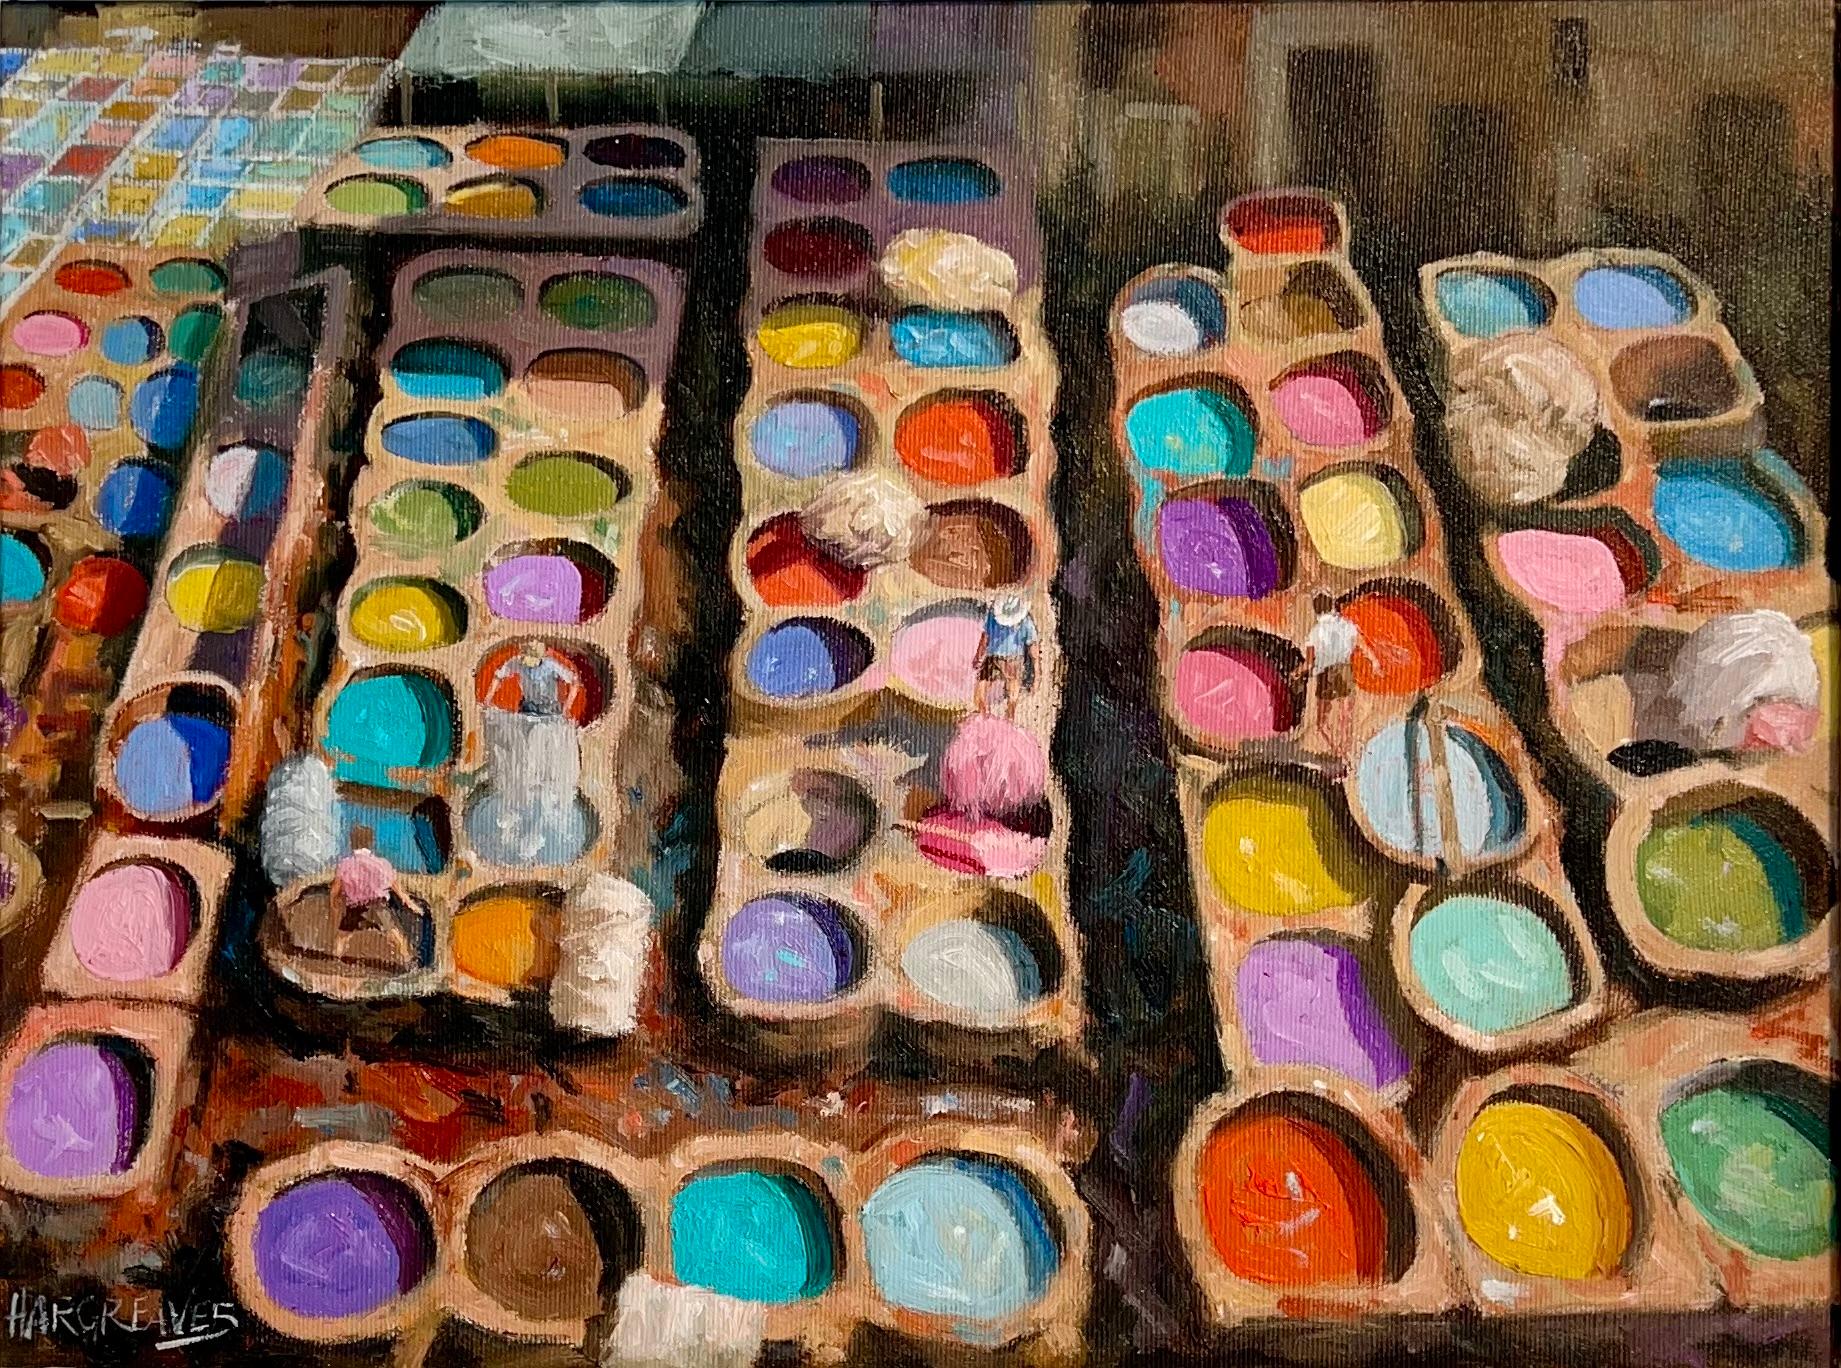 Ian Hargreaves Landscape Painting -  Vats of Dye in the City of Fez - oil painting modern landscape figurative study